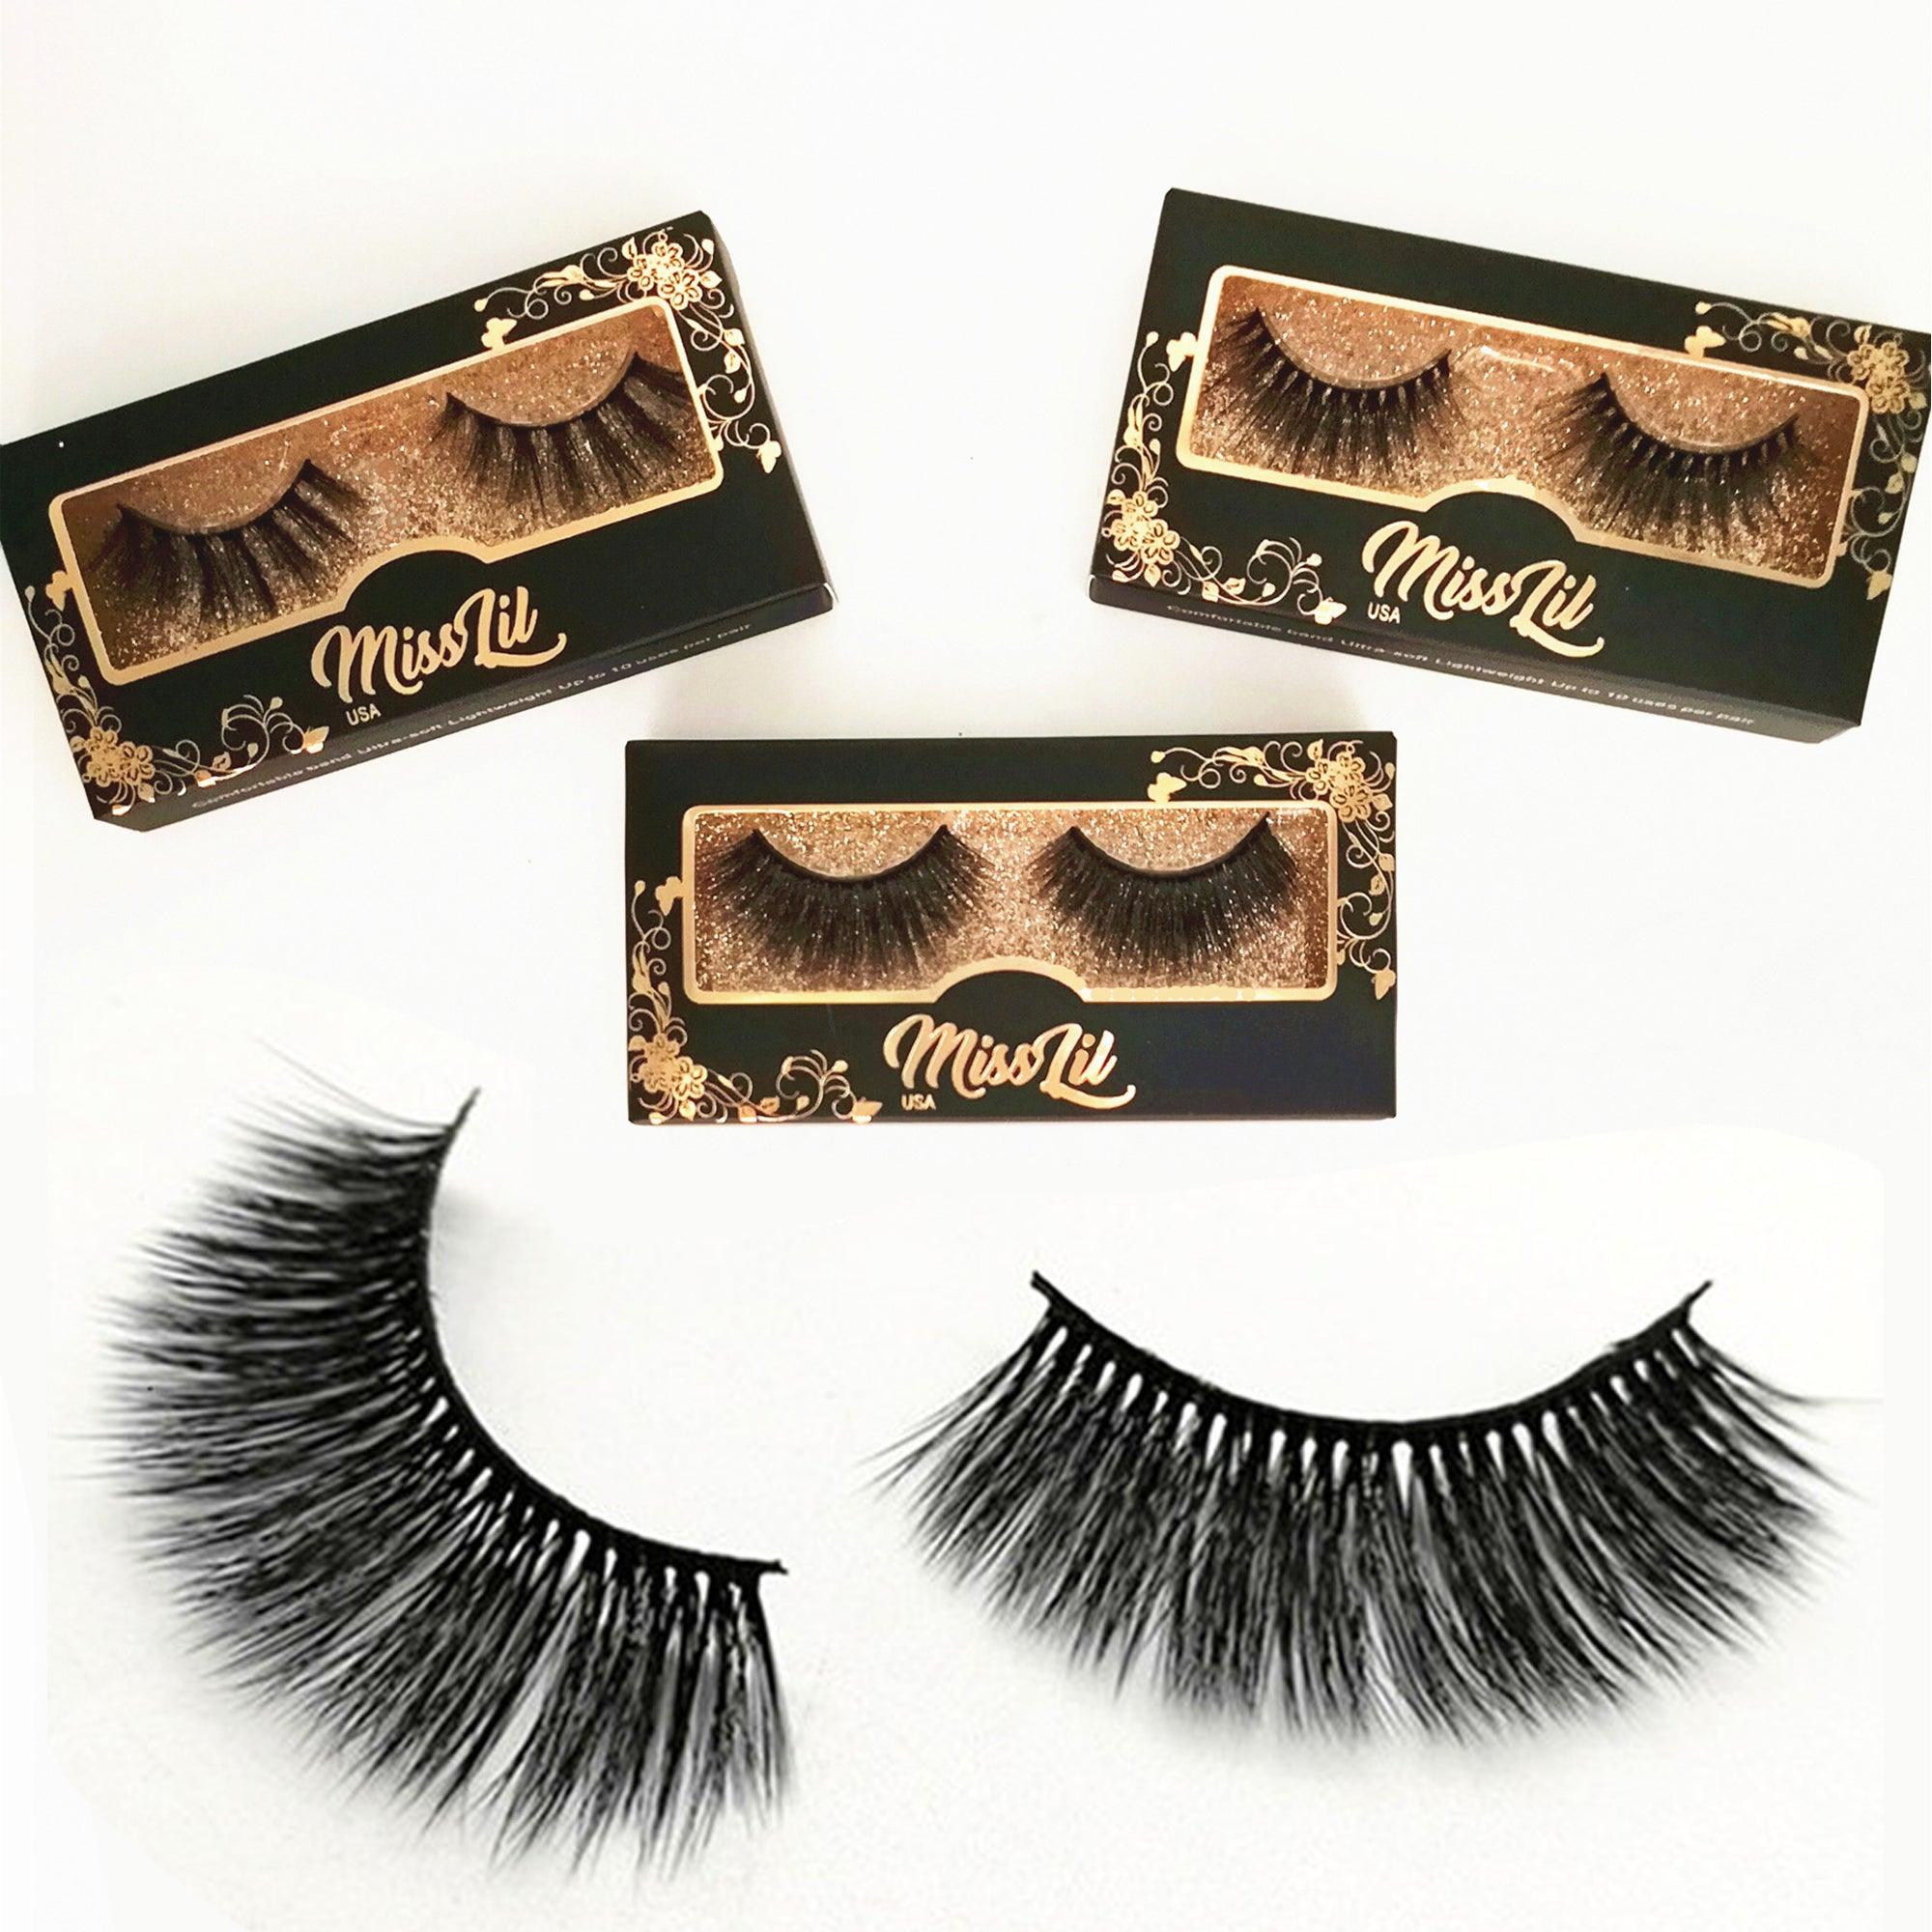 1-Pair Miss Lil USA Lashes #32 (Pack of 12) - Miss Lil USA Wholesale